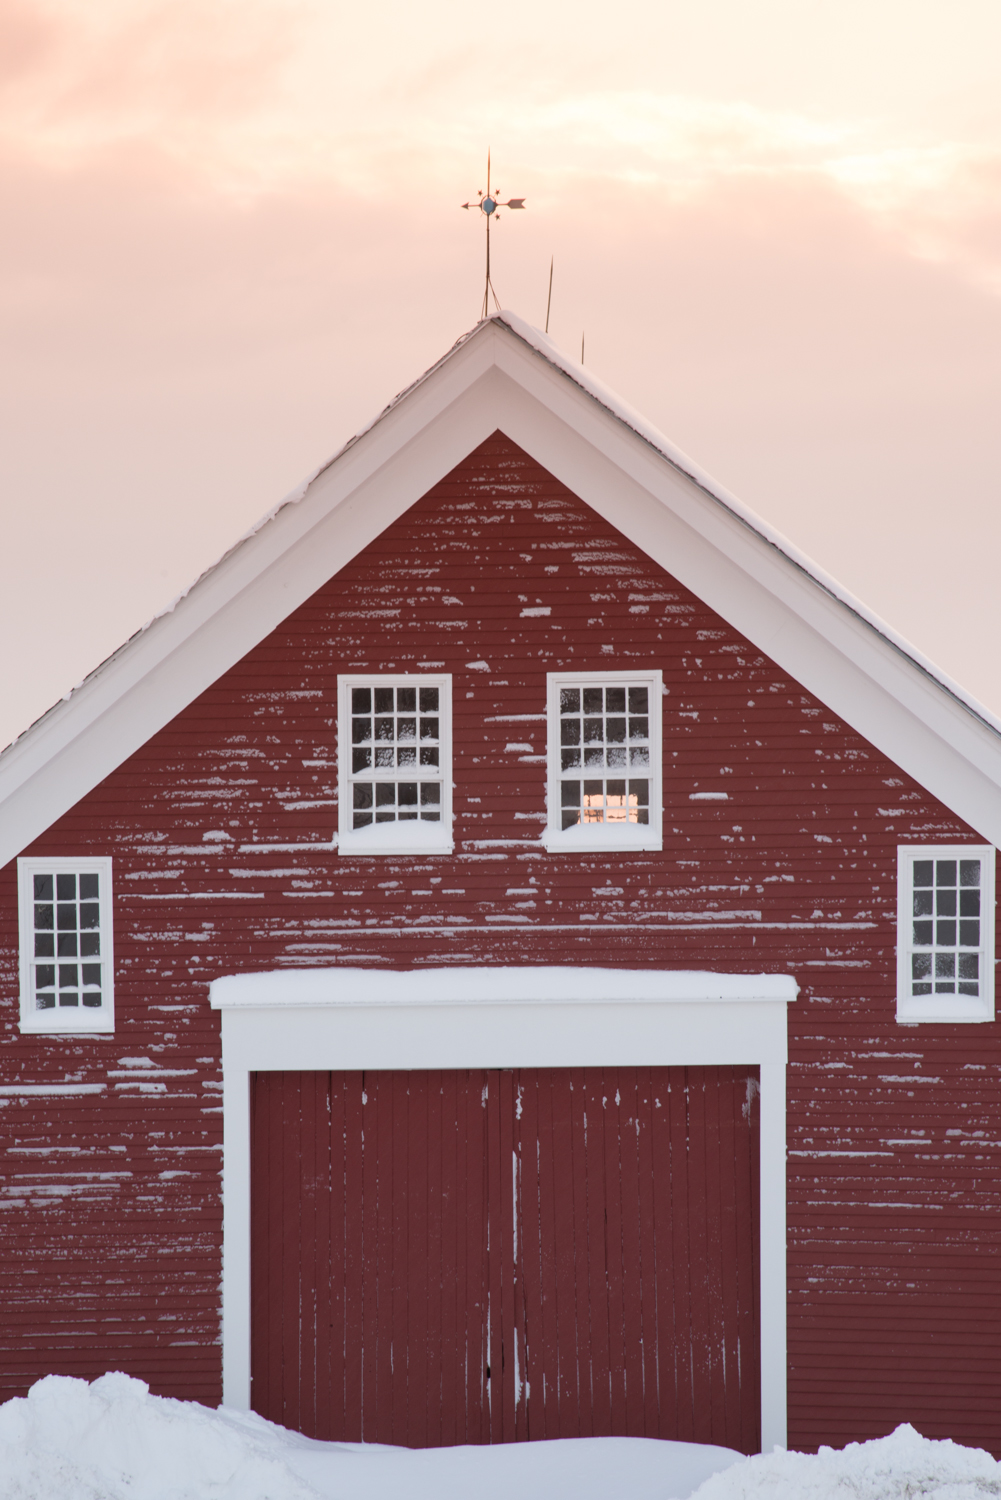 The front barn at Sabbaday Lake Shaker Village, the only active Shaker community left in existence.